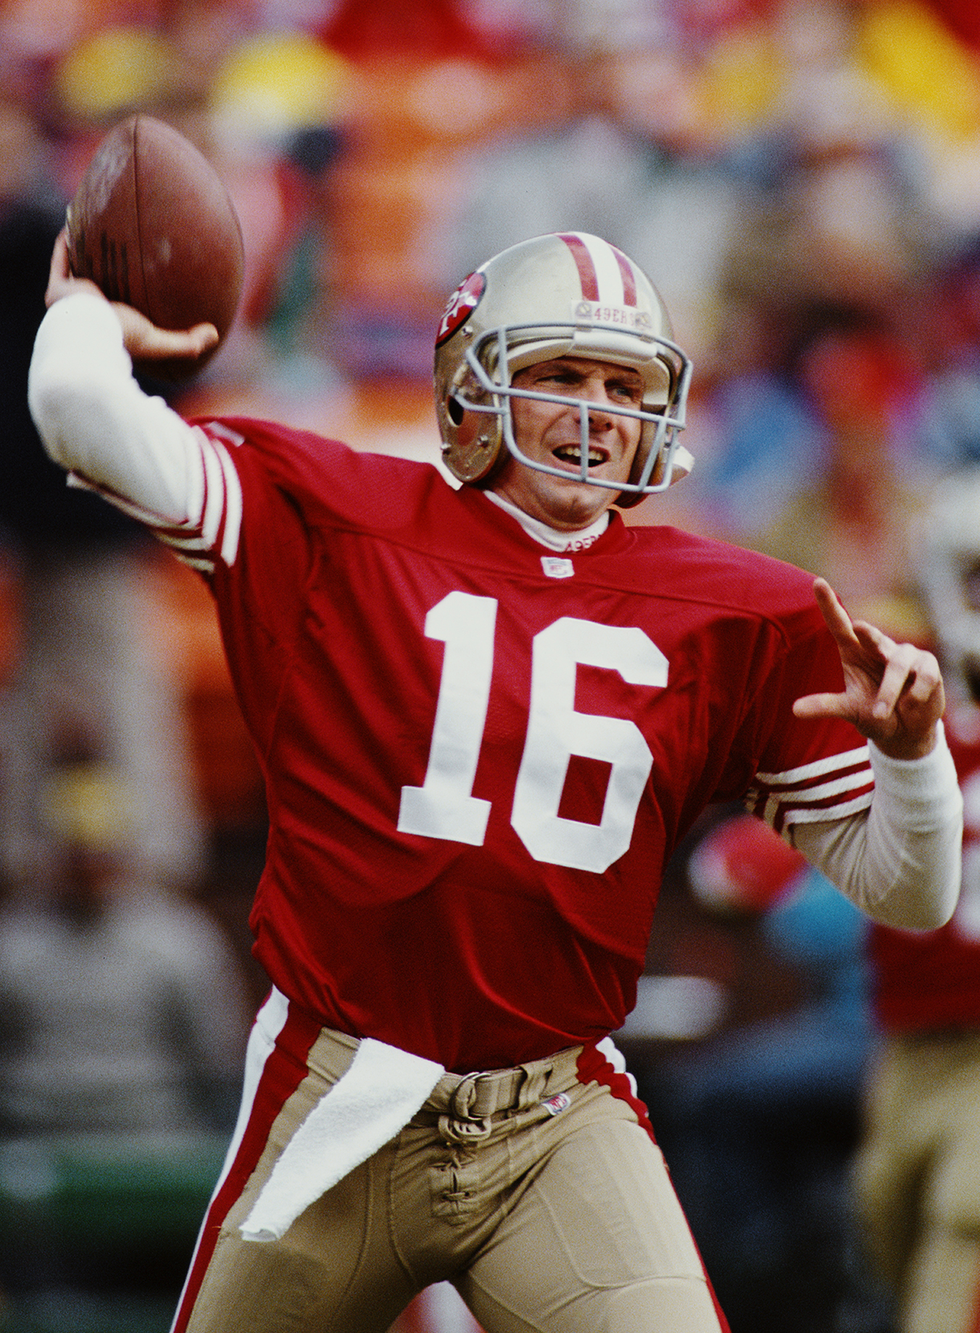 joe montana 16, back up quarterback for the san francisco 49ers during the national football conference west divisional championship game against the washington redskins on 9 january 1993 at candlestick park, san francisco, california, united states the 49ers won the game 20   13  photo by otto greule jrallsportgetty images